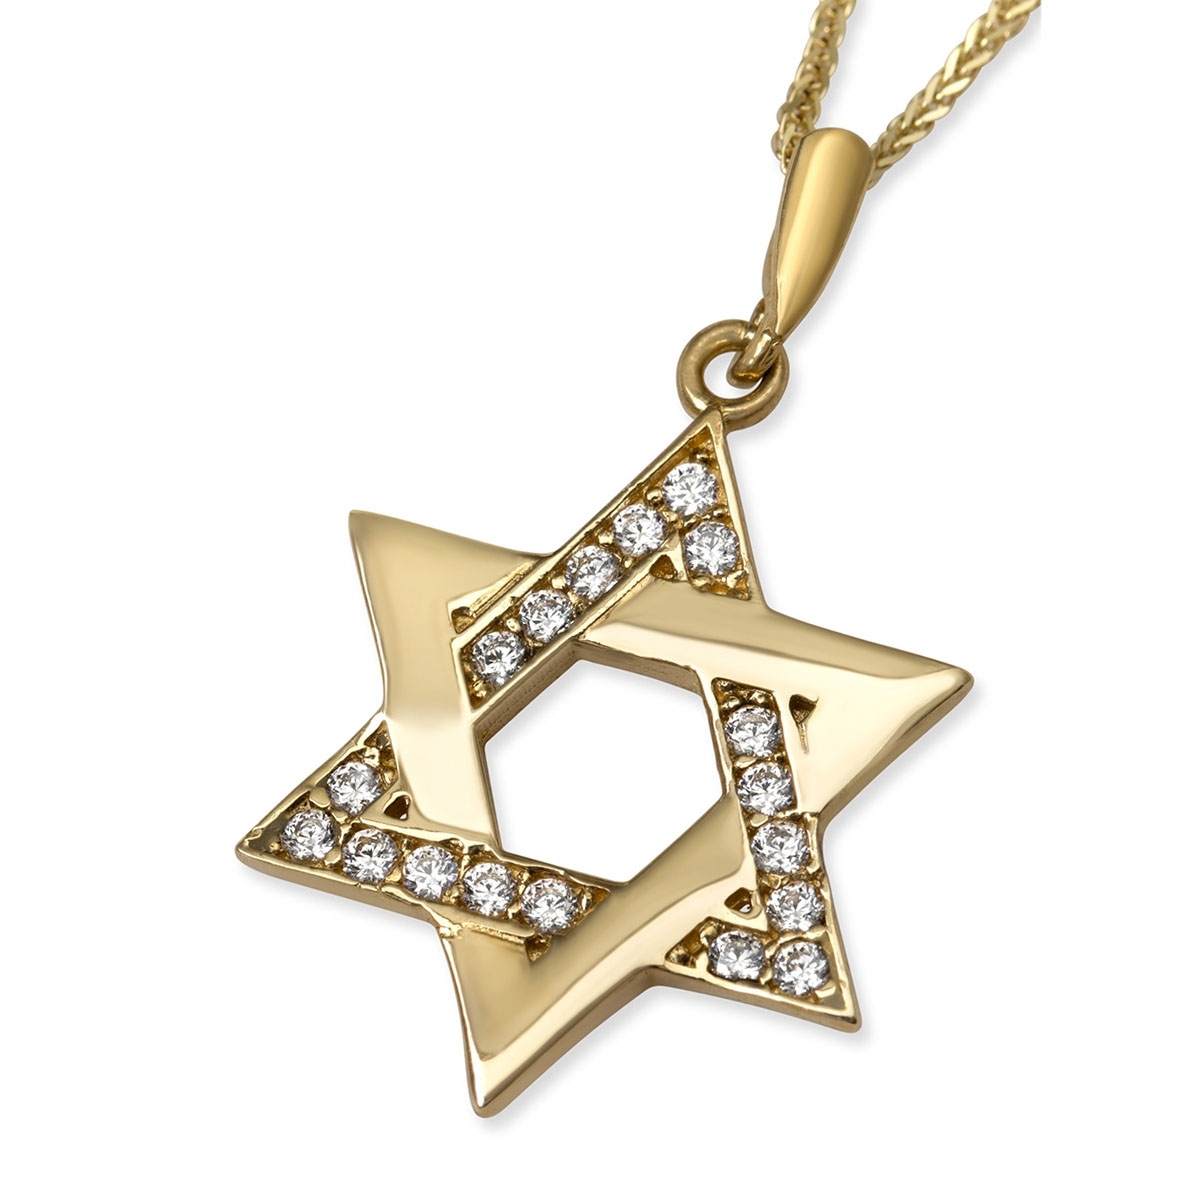 Exquisite 14K Yellow Gold and Cubic Zirconia Interlocking Star of David Pendant Necklace - 1